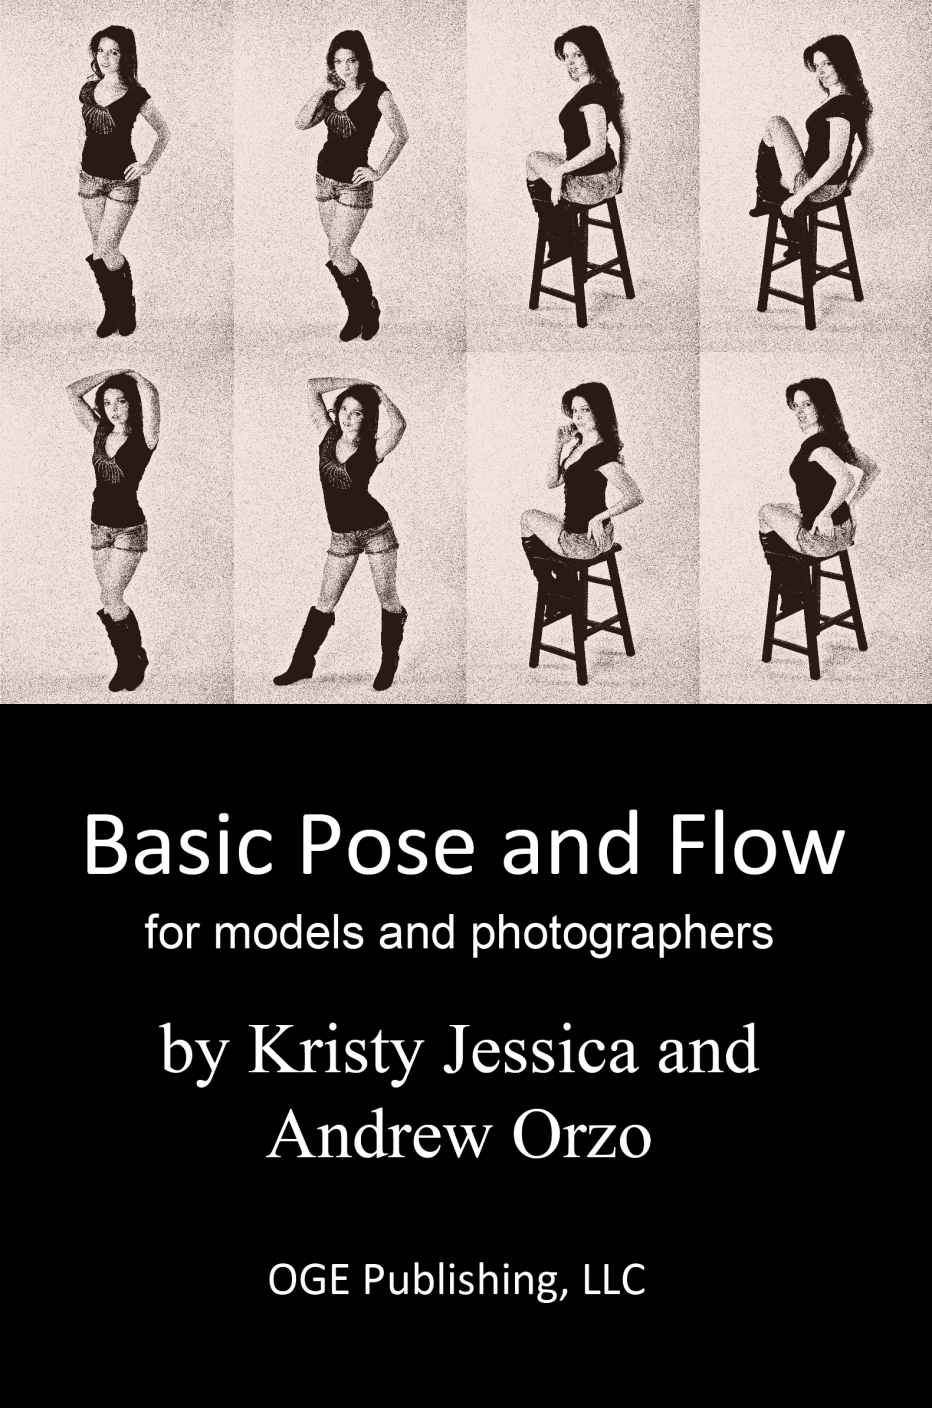 Basic Pose and Flow